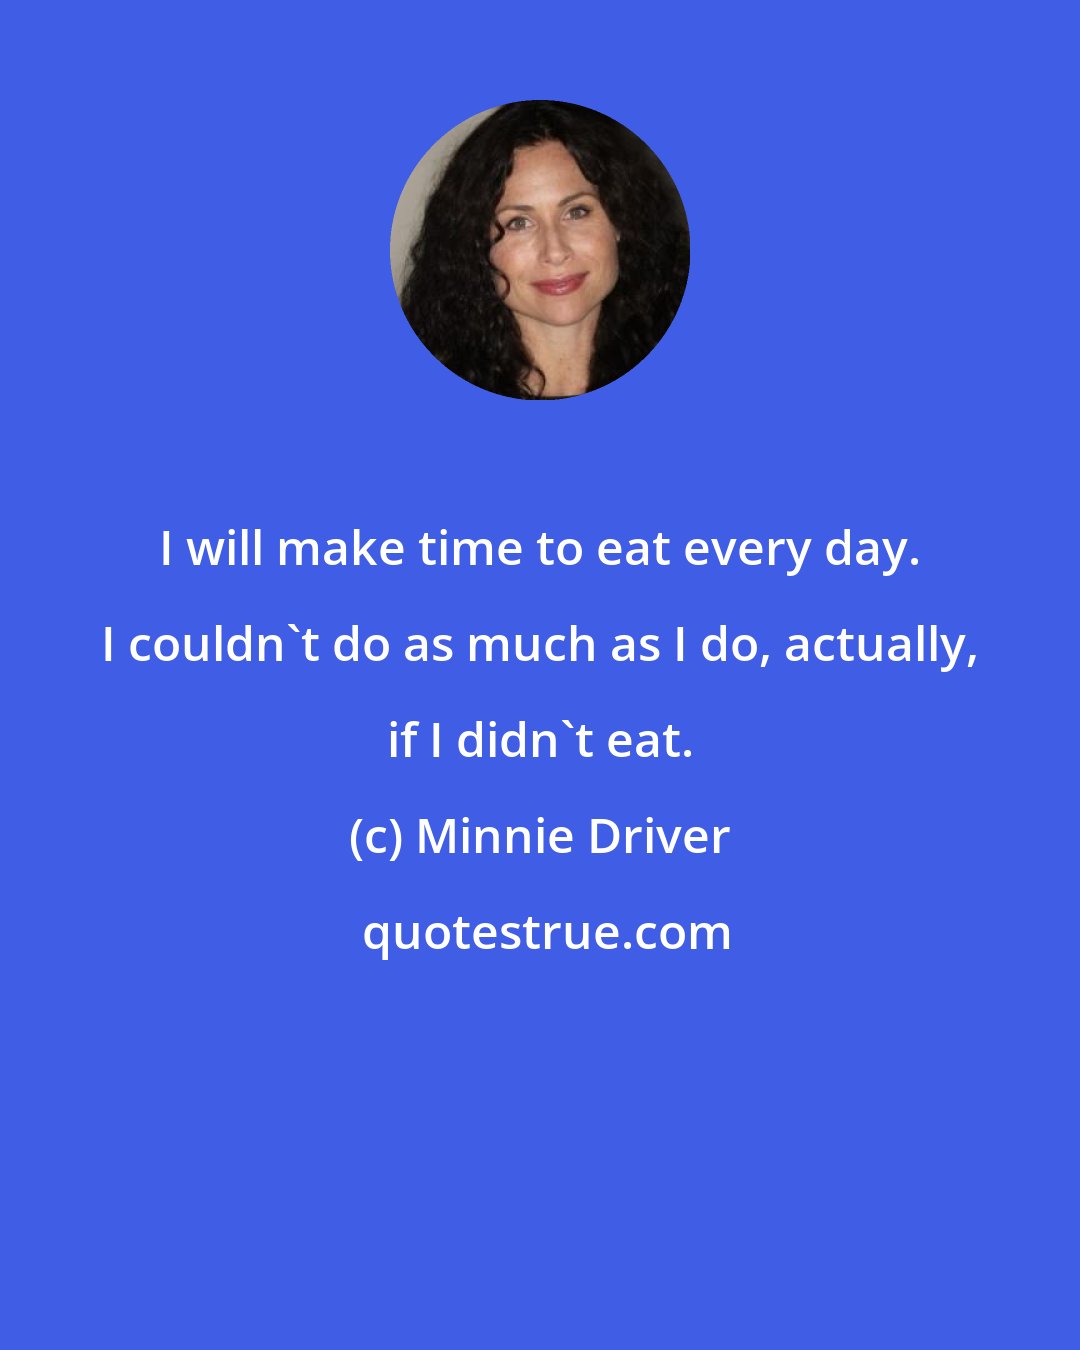 Minnie Driver: I will make time to eat every day. I couldn't do as much as I do, actually, if I didn't eat.